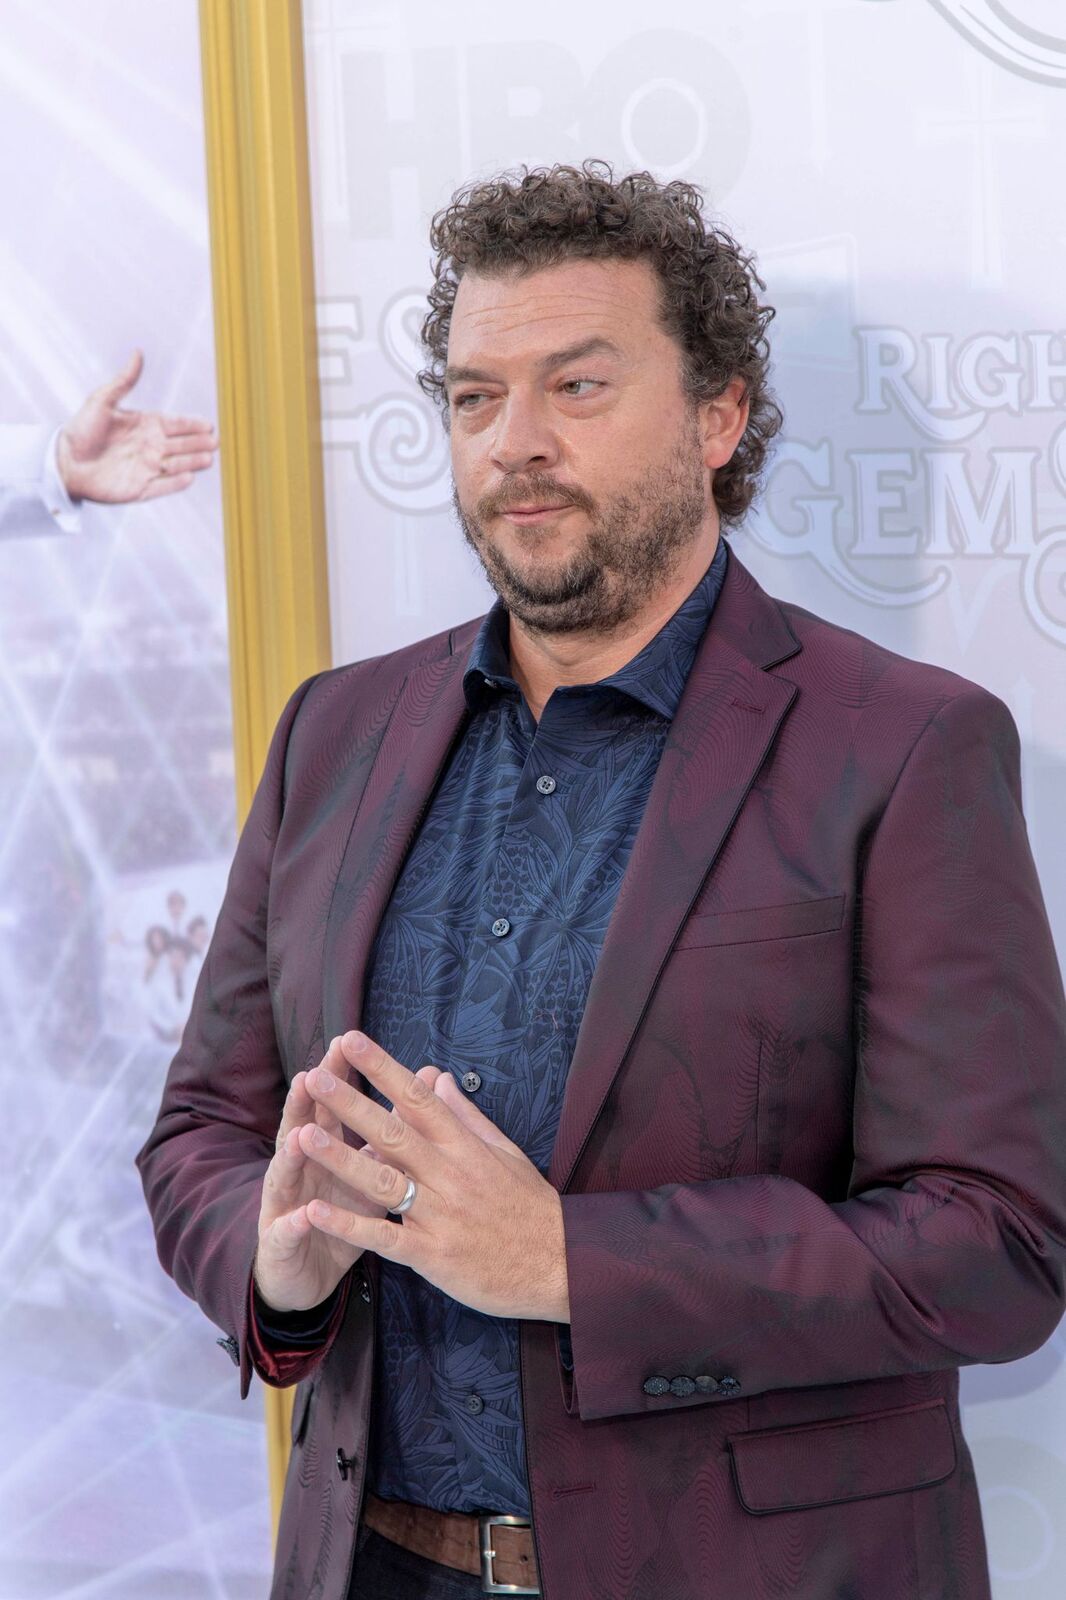 Danny McBride at the "The Righteous Gemstones" premiere/ Source: Shutterstock